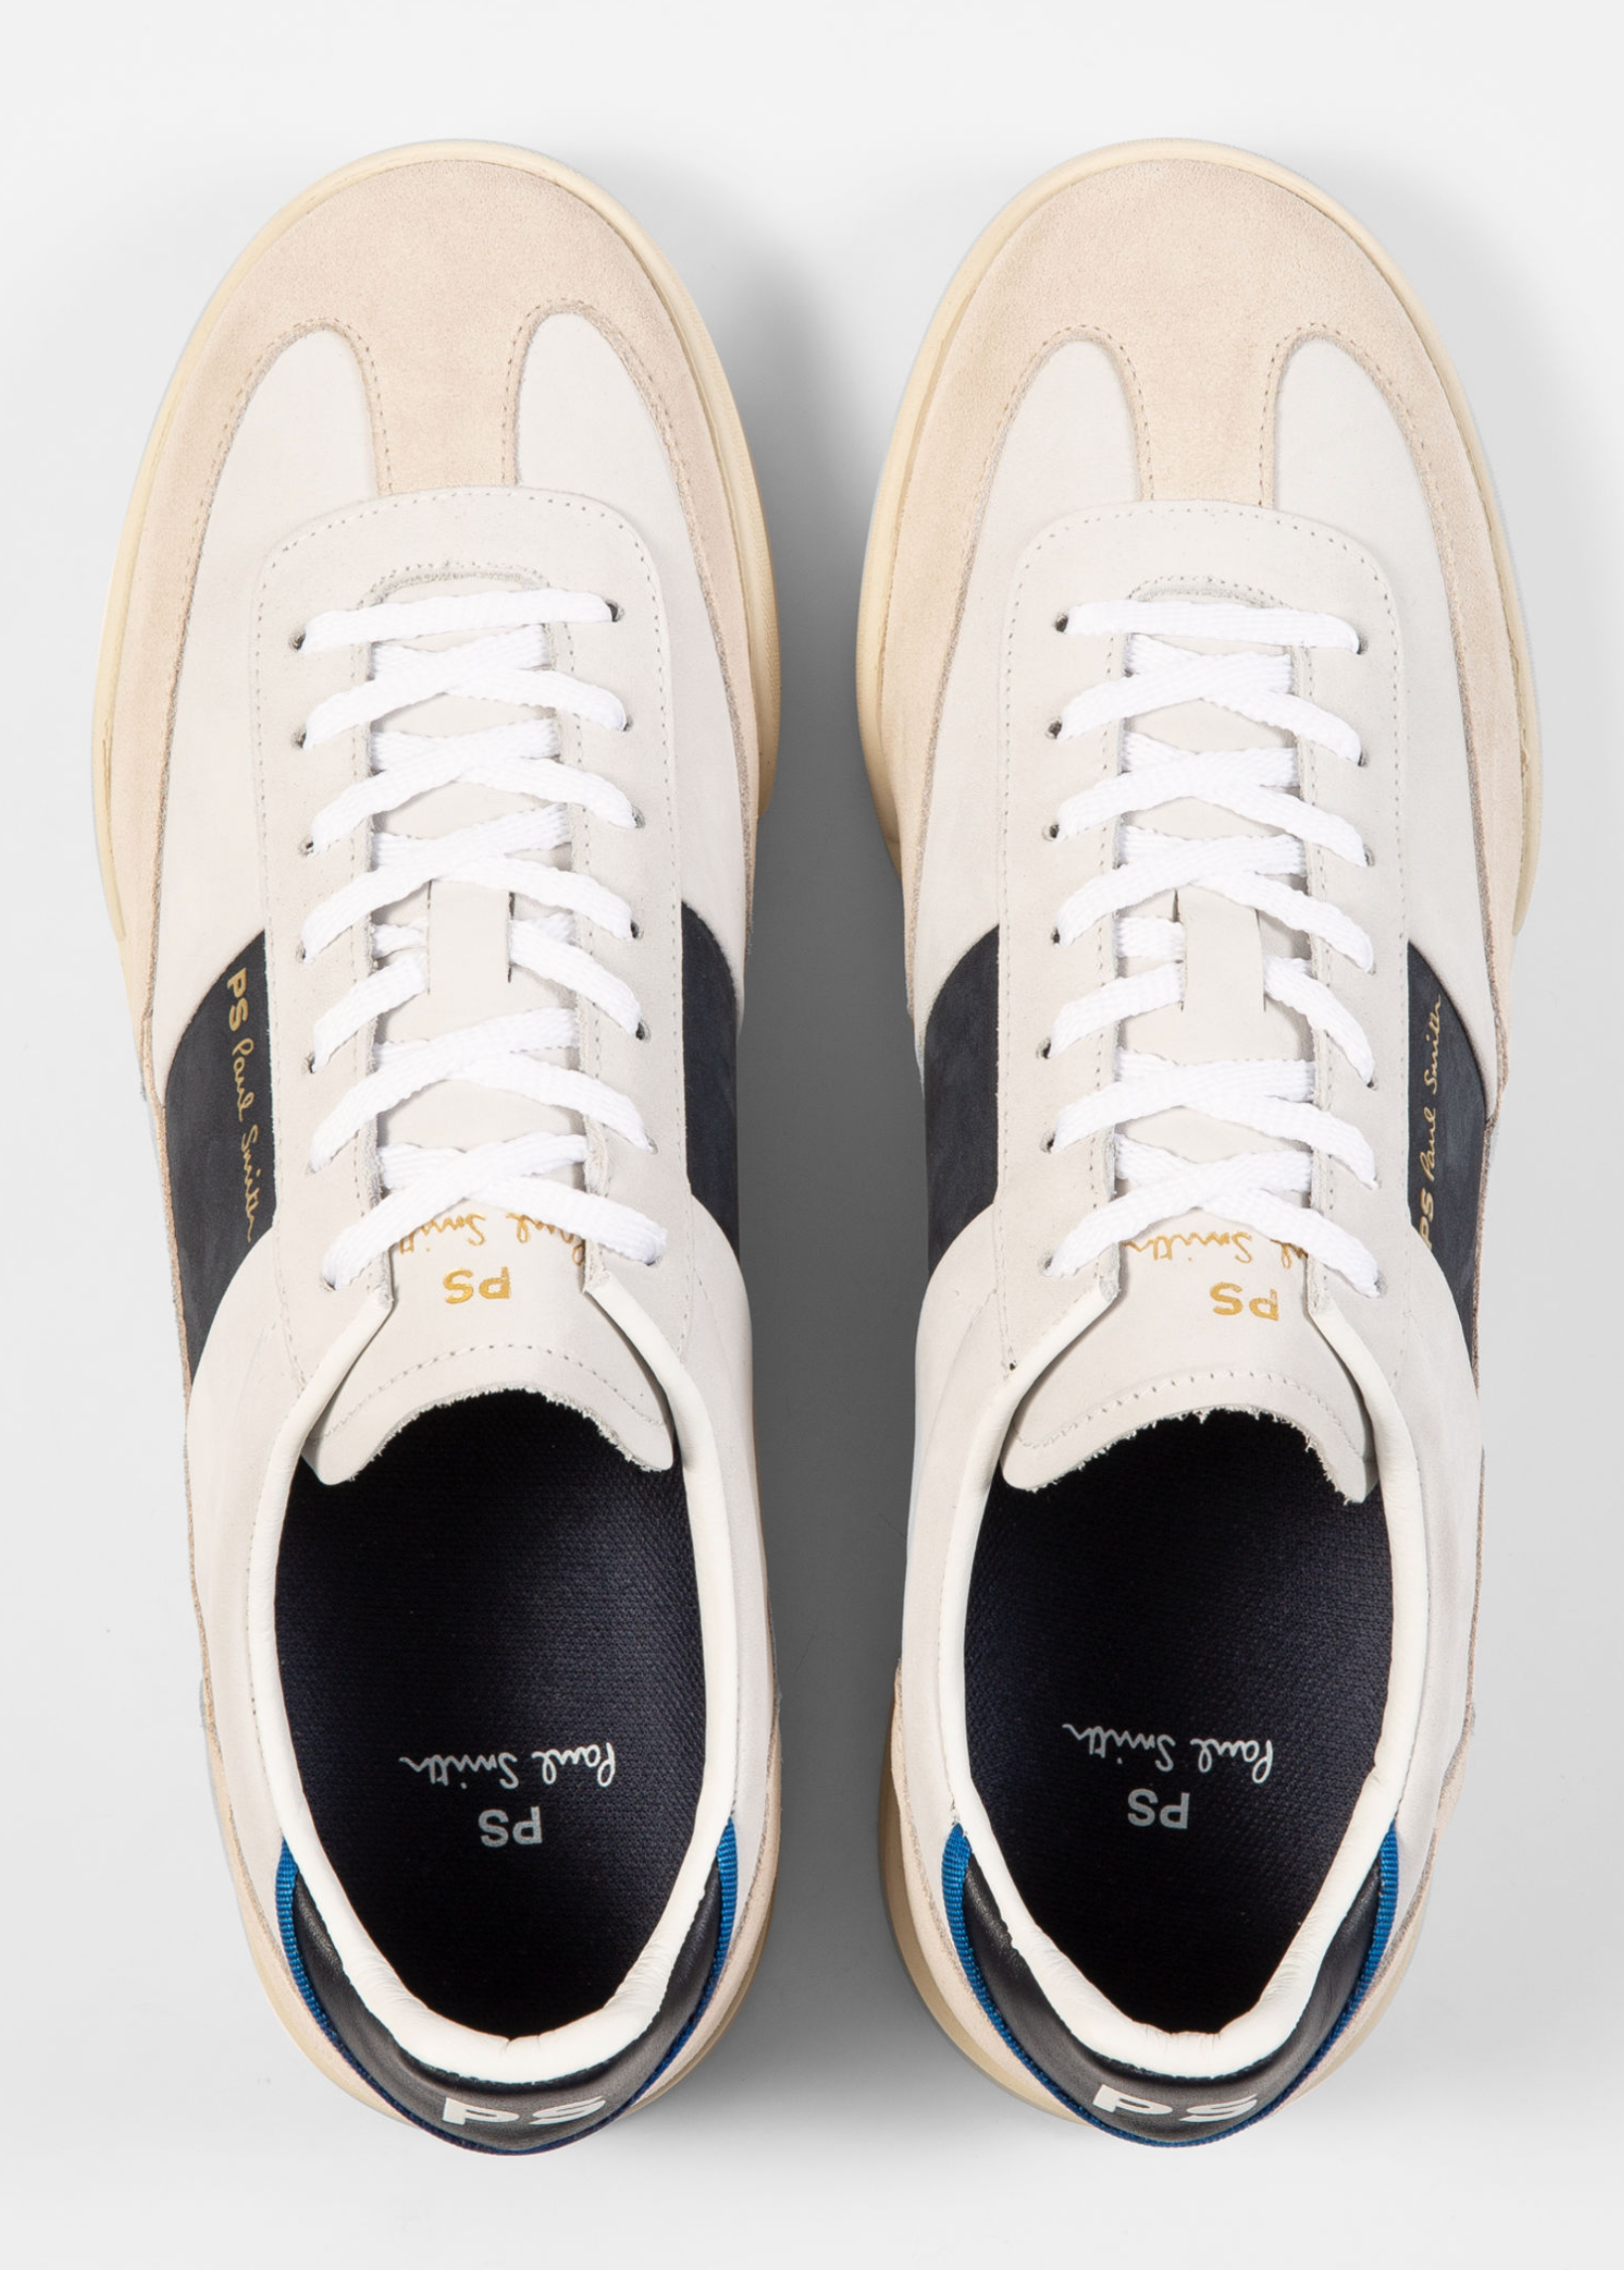 PS Paul Smith "DOVER" Trainers White